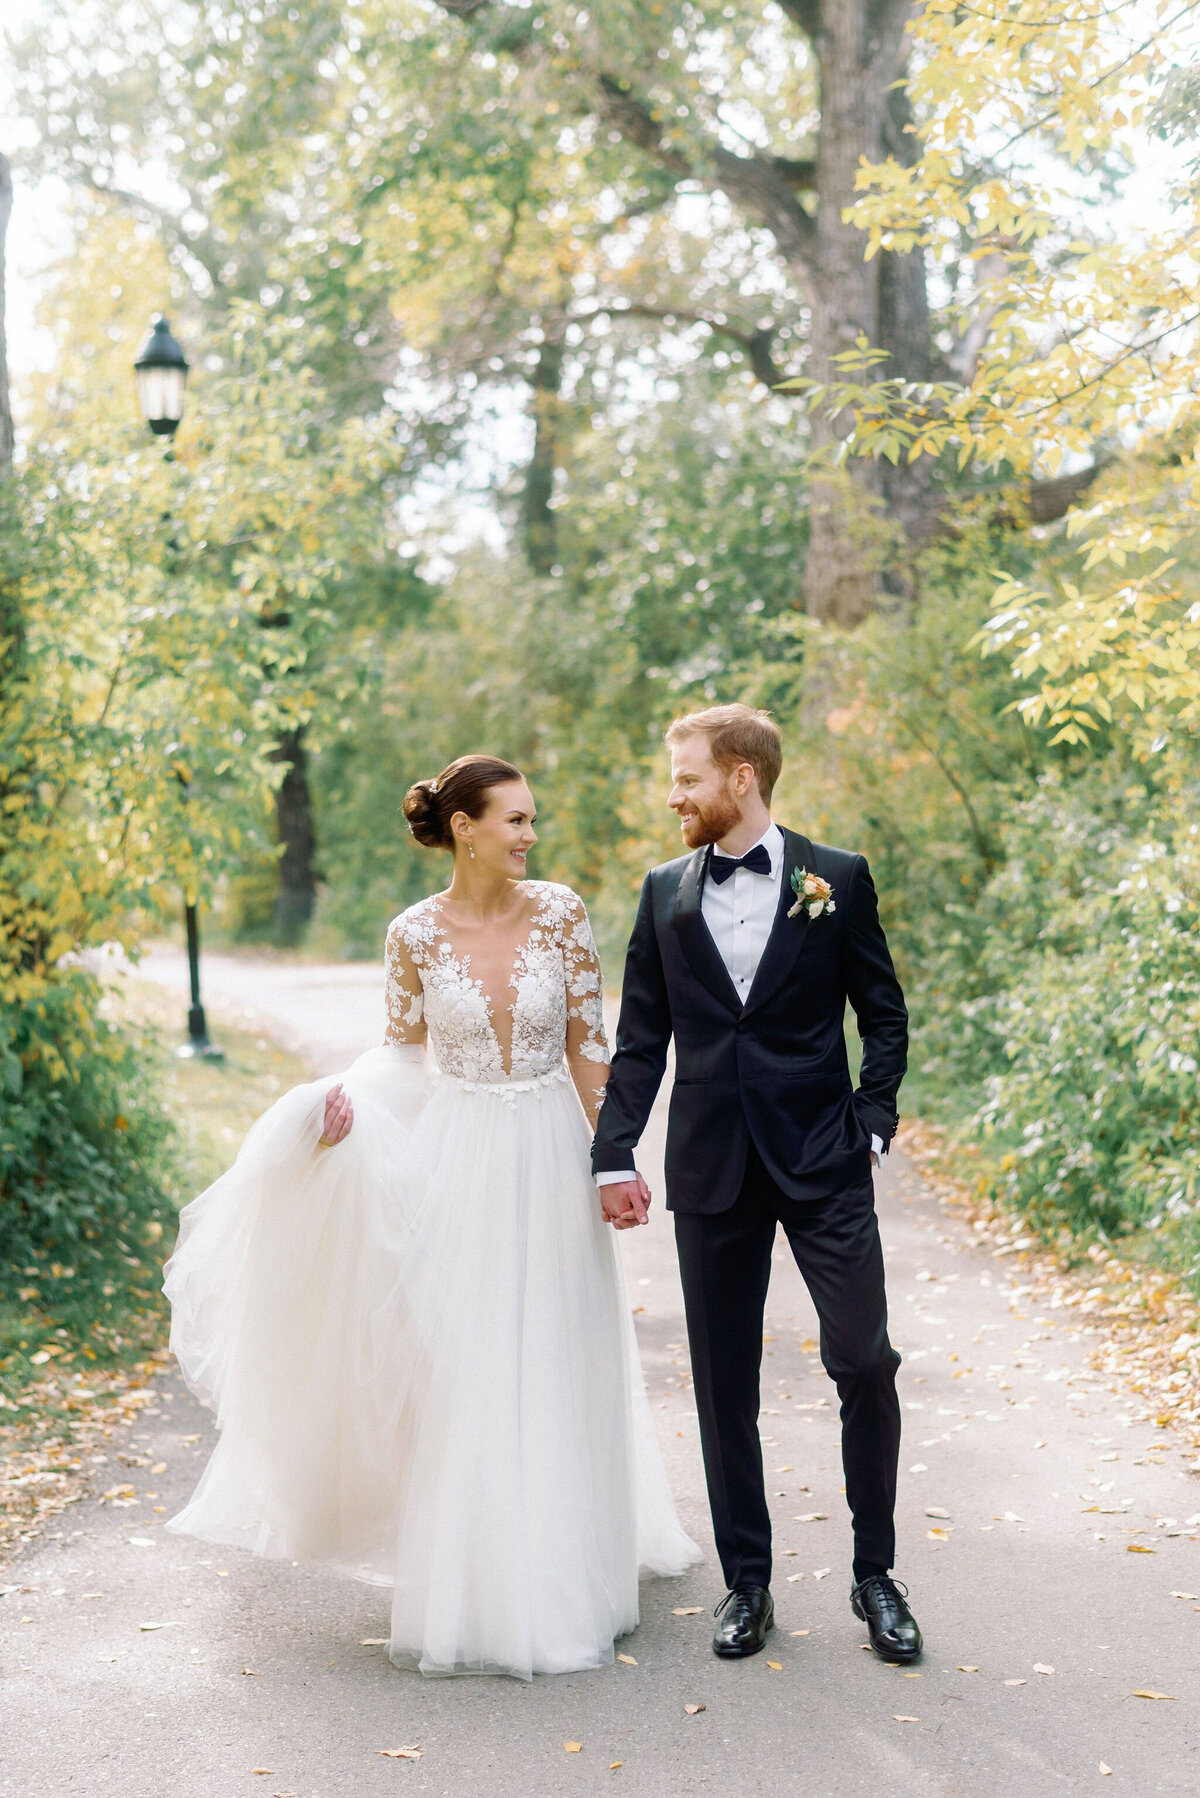 Gorgeous bride and groom walking together at sunset, captured by Kaity Body Photography, elegant film inspired wedding photographer in Calgary, Alberta. Featured on the Bronte Bride Vendor Guide.